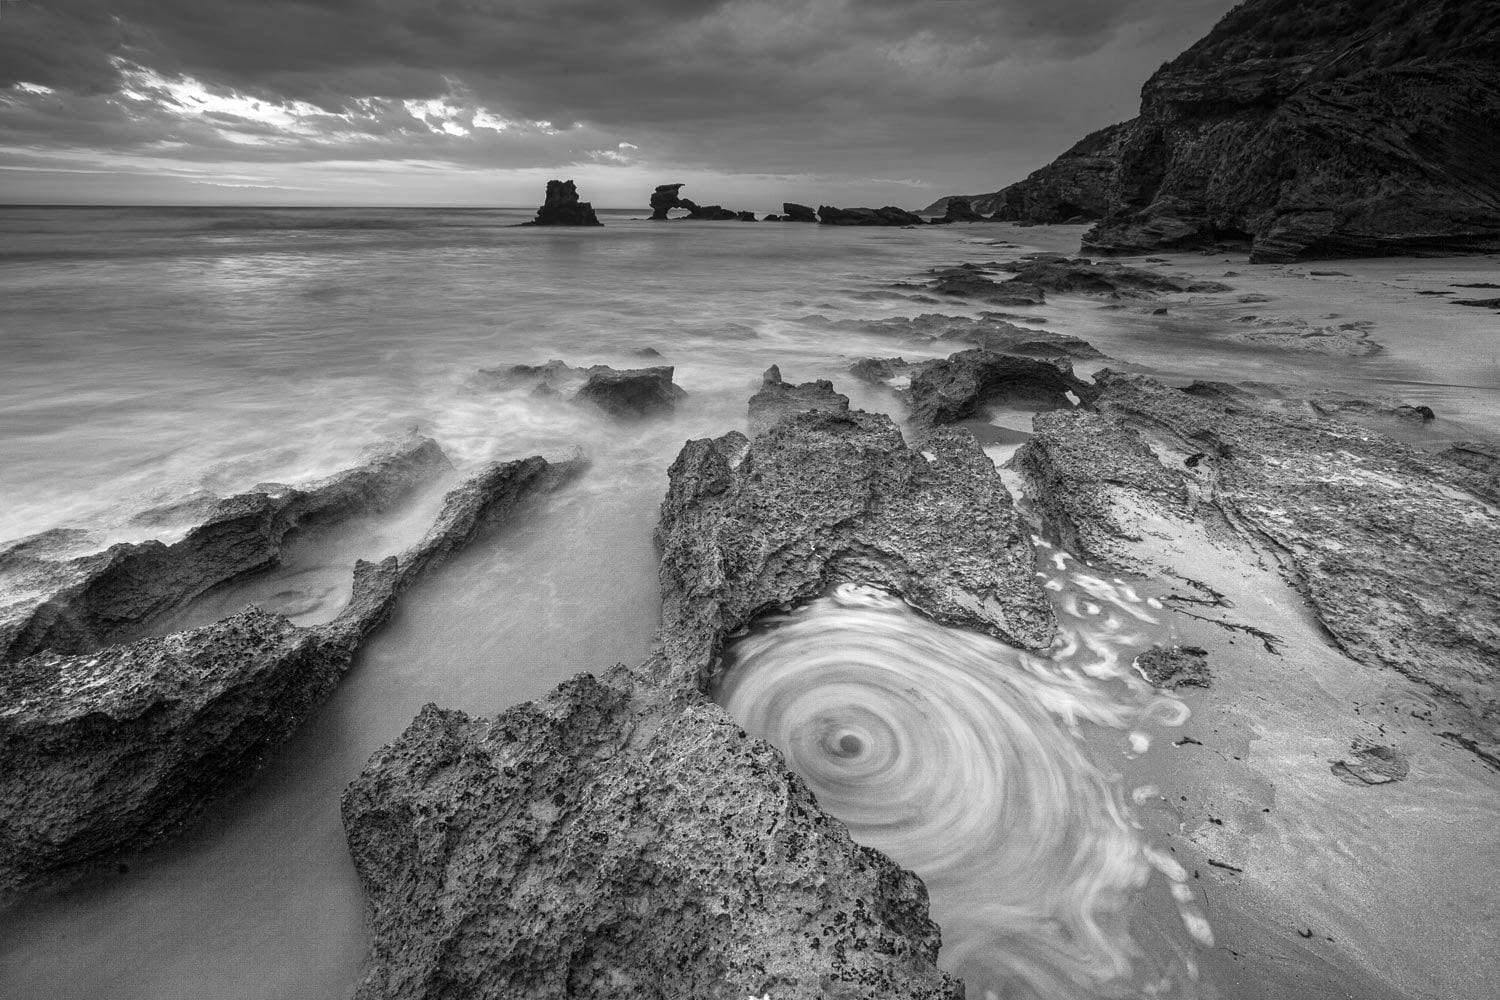 A lake with weird shapes of stones, Swirling Water, Portsea - Mornington Peninsula VIC